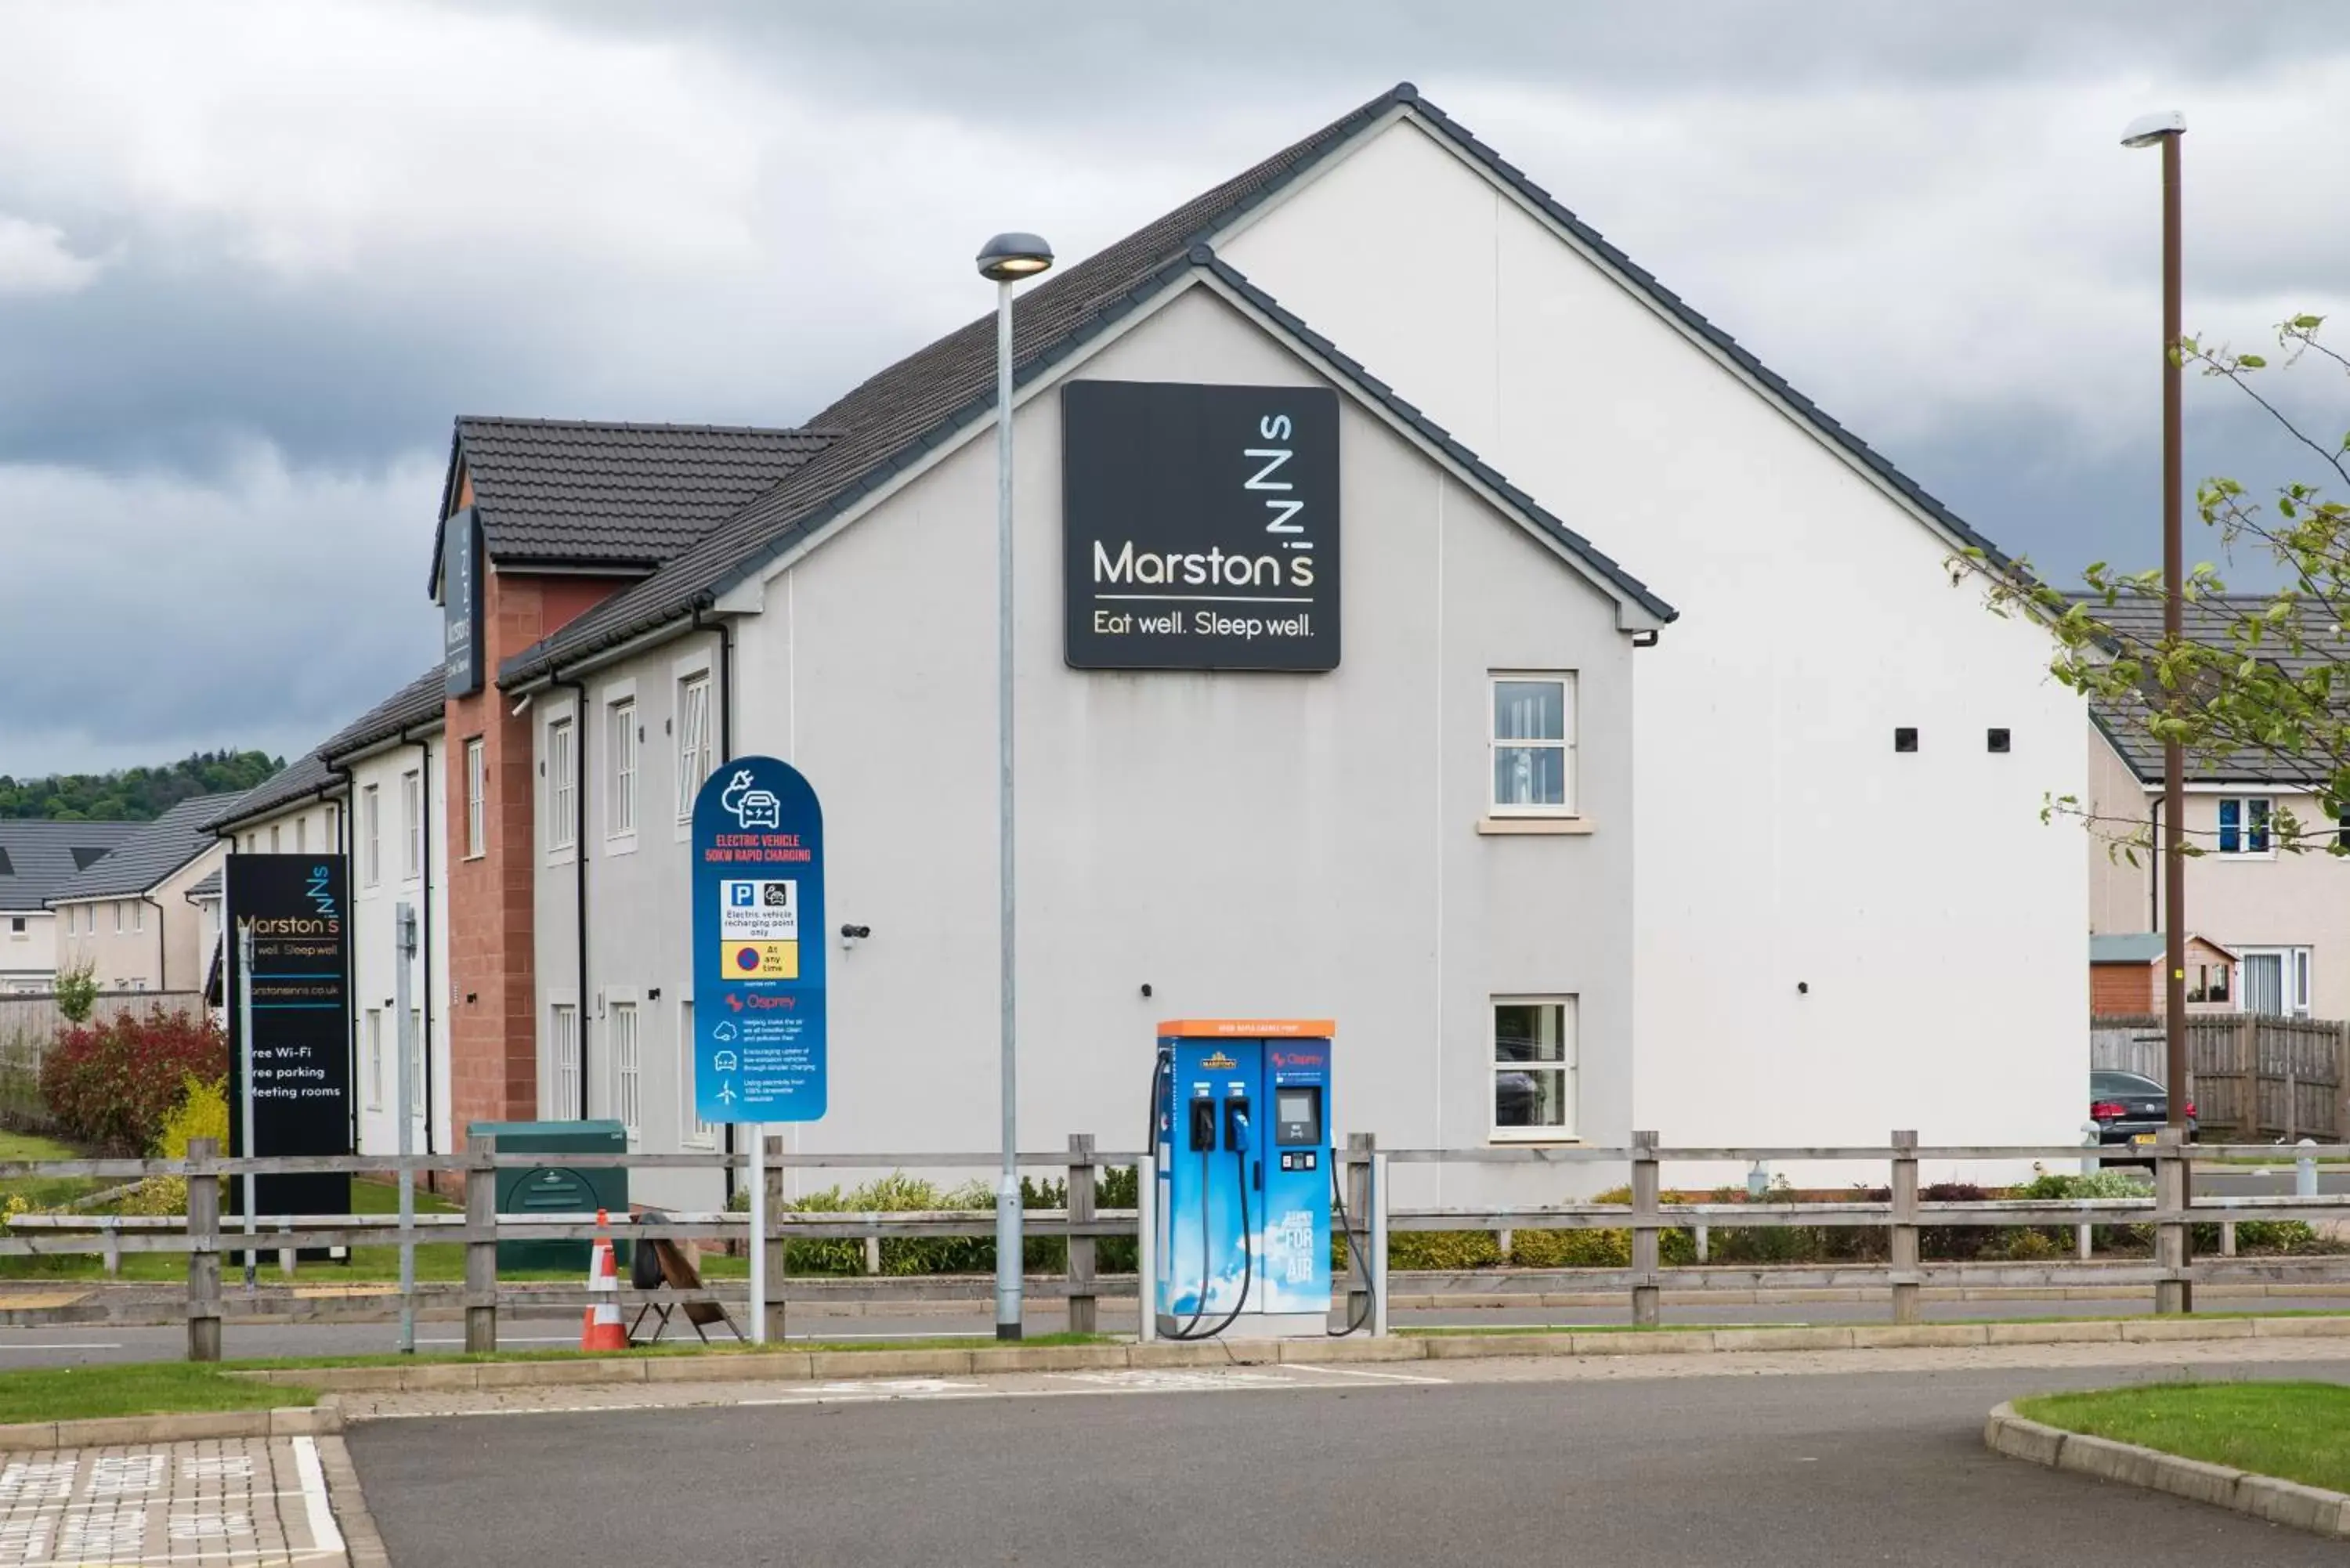 Property Building in Highland Gate, Stirling by Marston's Inns